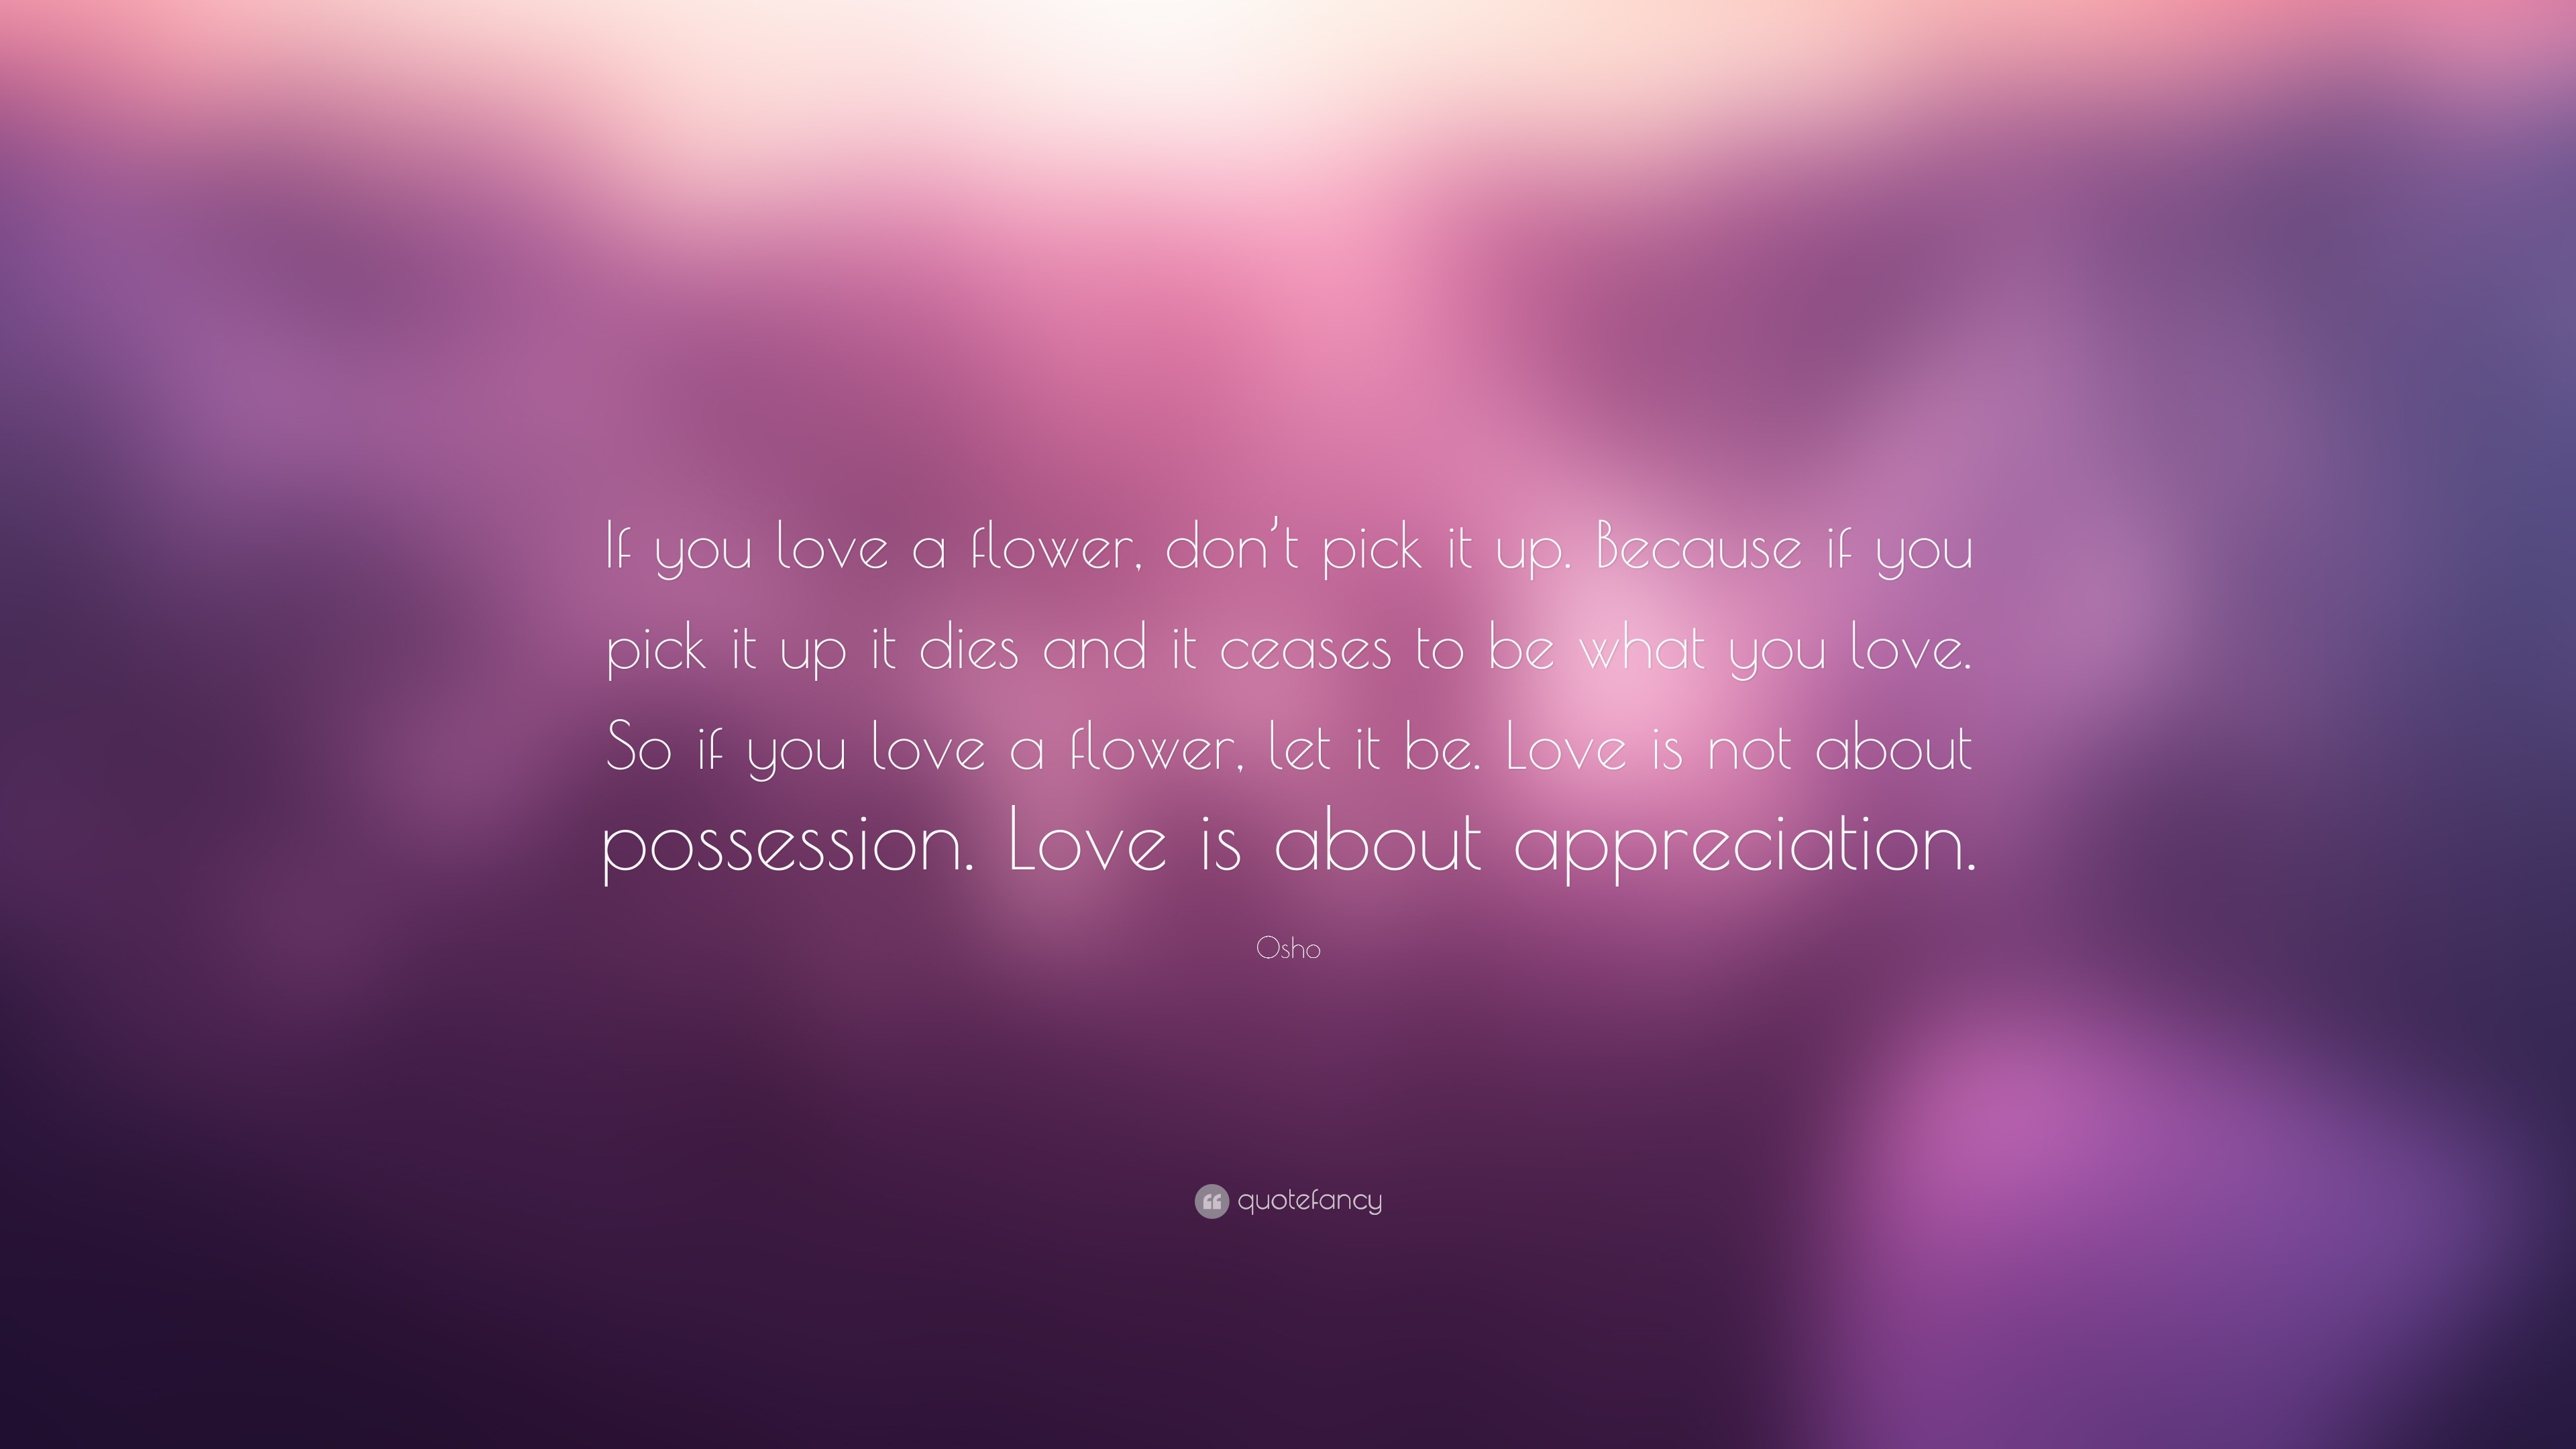 Osho Quote “If you love a flower don t pick it up